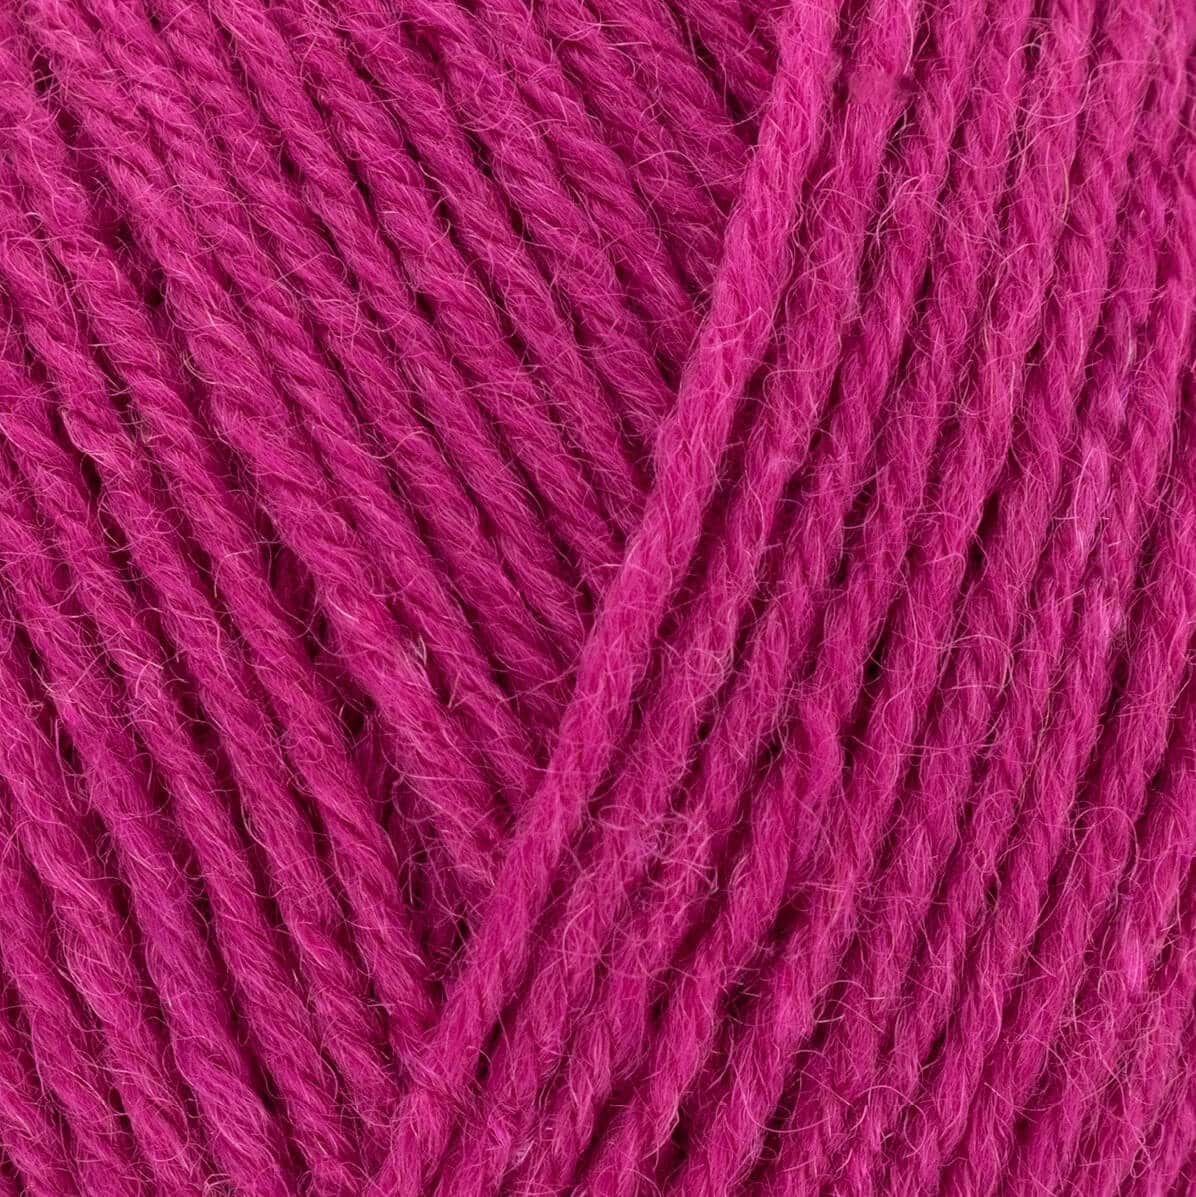 West Yorkshire Spinners Signature 4ply - Fuchsia 1002